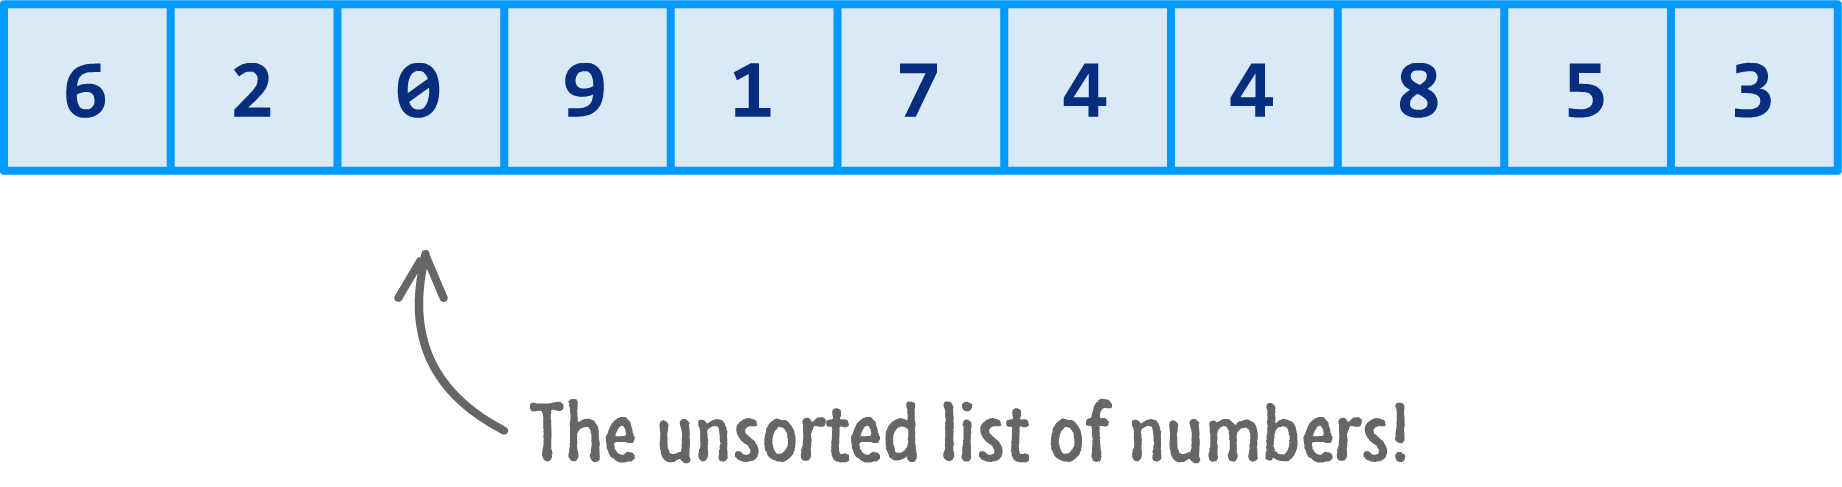 unsorted numbers